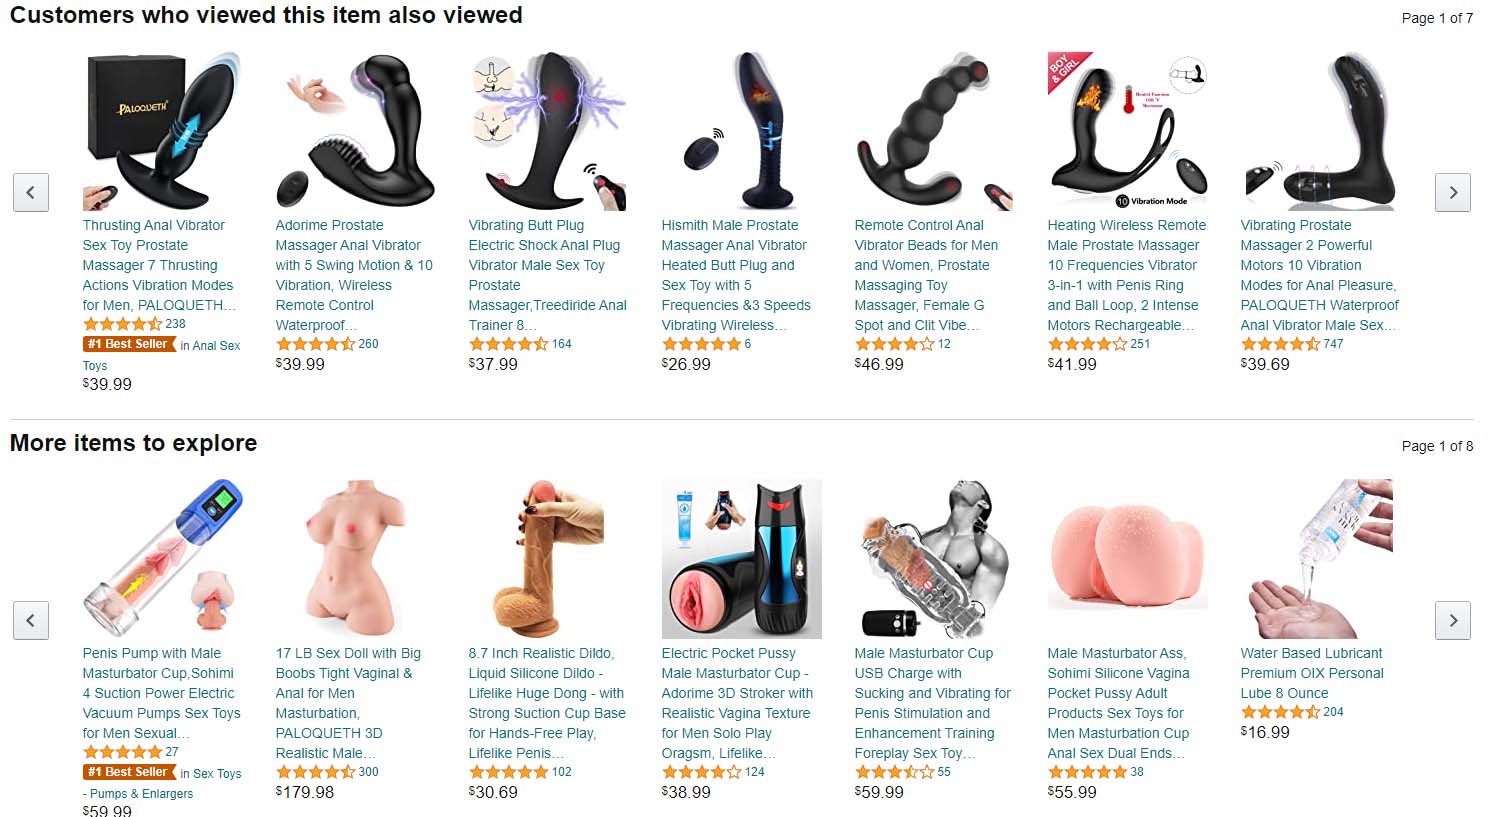 Wireless Remote Control Male Prostate Massager Vibrator 10 Speed Vibrating Anal Inflatable Expansion Butt Plug Sex Toys For Men (9)